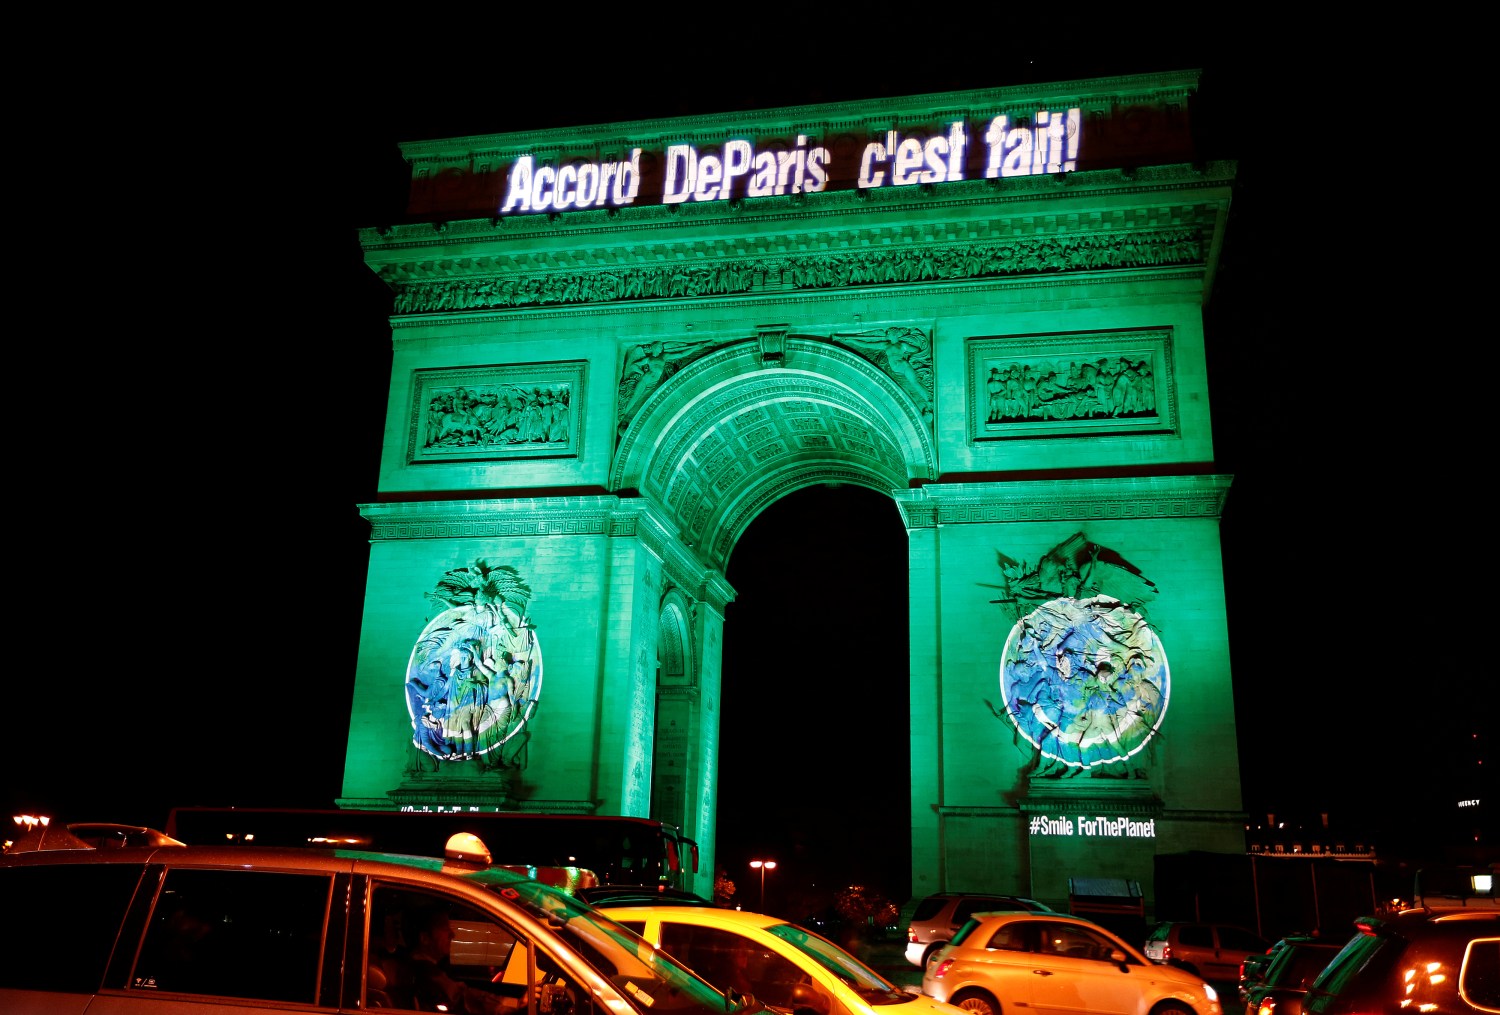 The Arc de Triomphe is illuminated in green with the words "Paris Agreement is Done", to celebrate the Paris U.N. COP21 Climate Change agreement in Paris